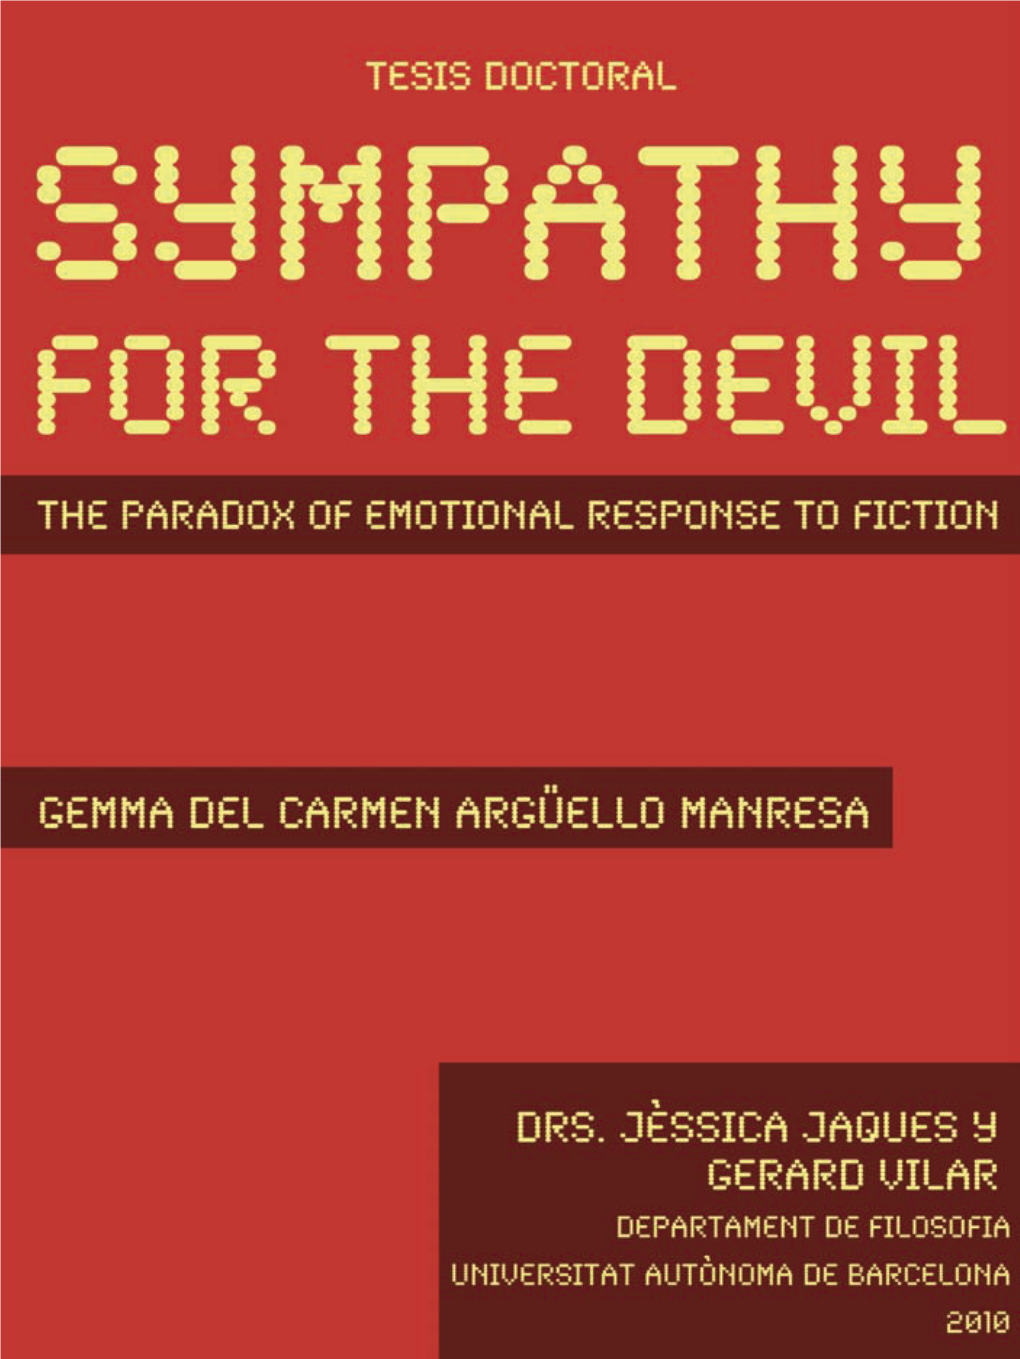 For the Devil the PARADOX of EMOTIONAL RESPONSE to FICTION